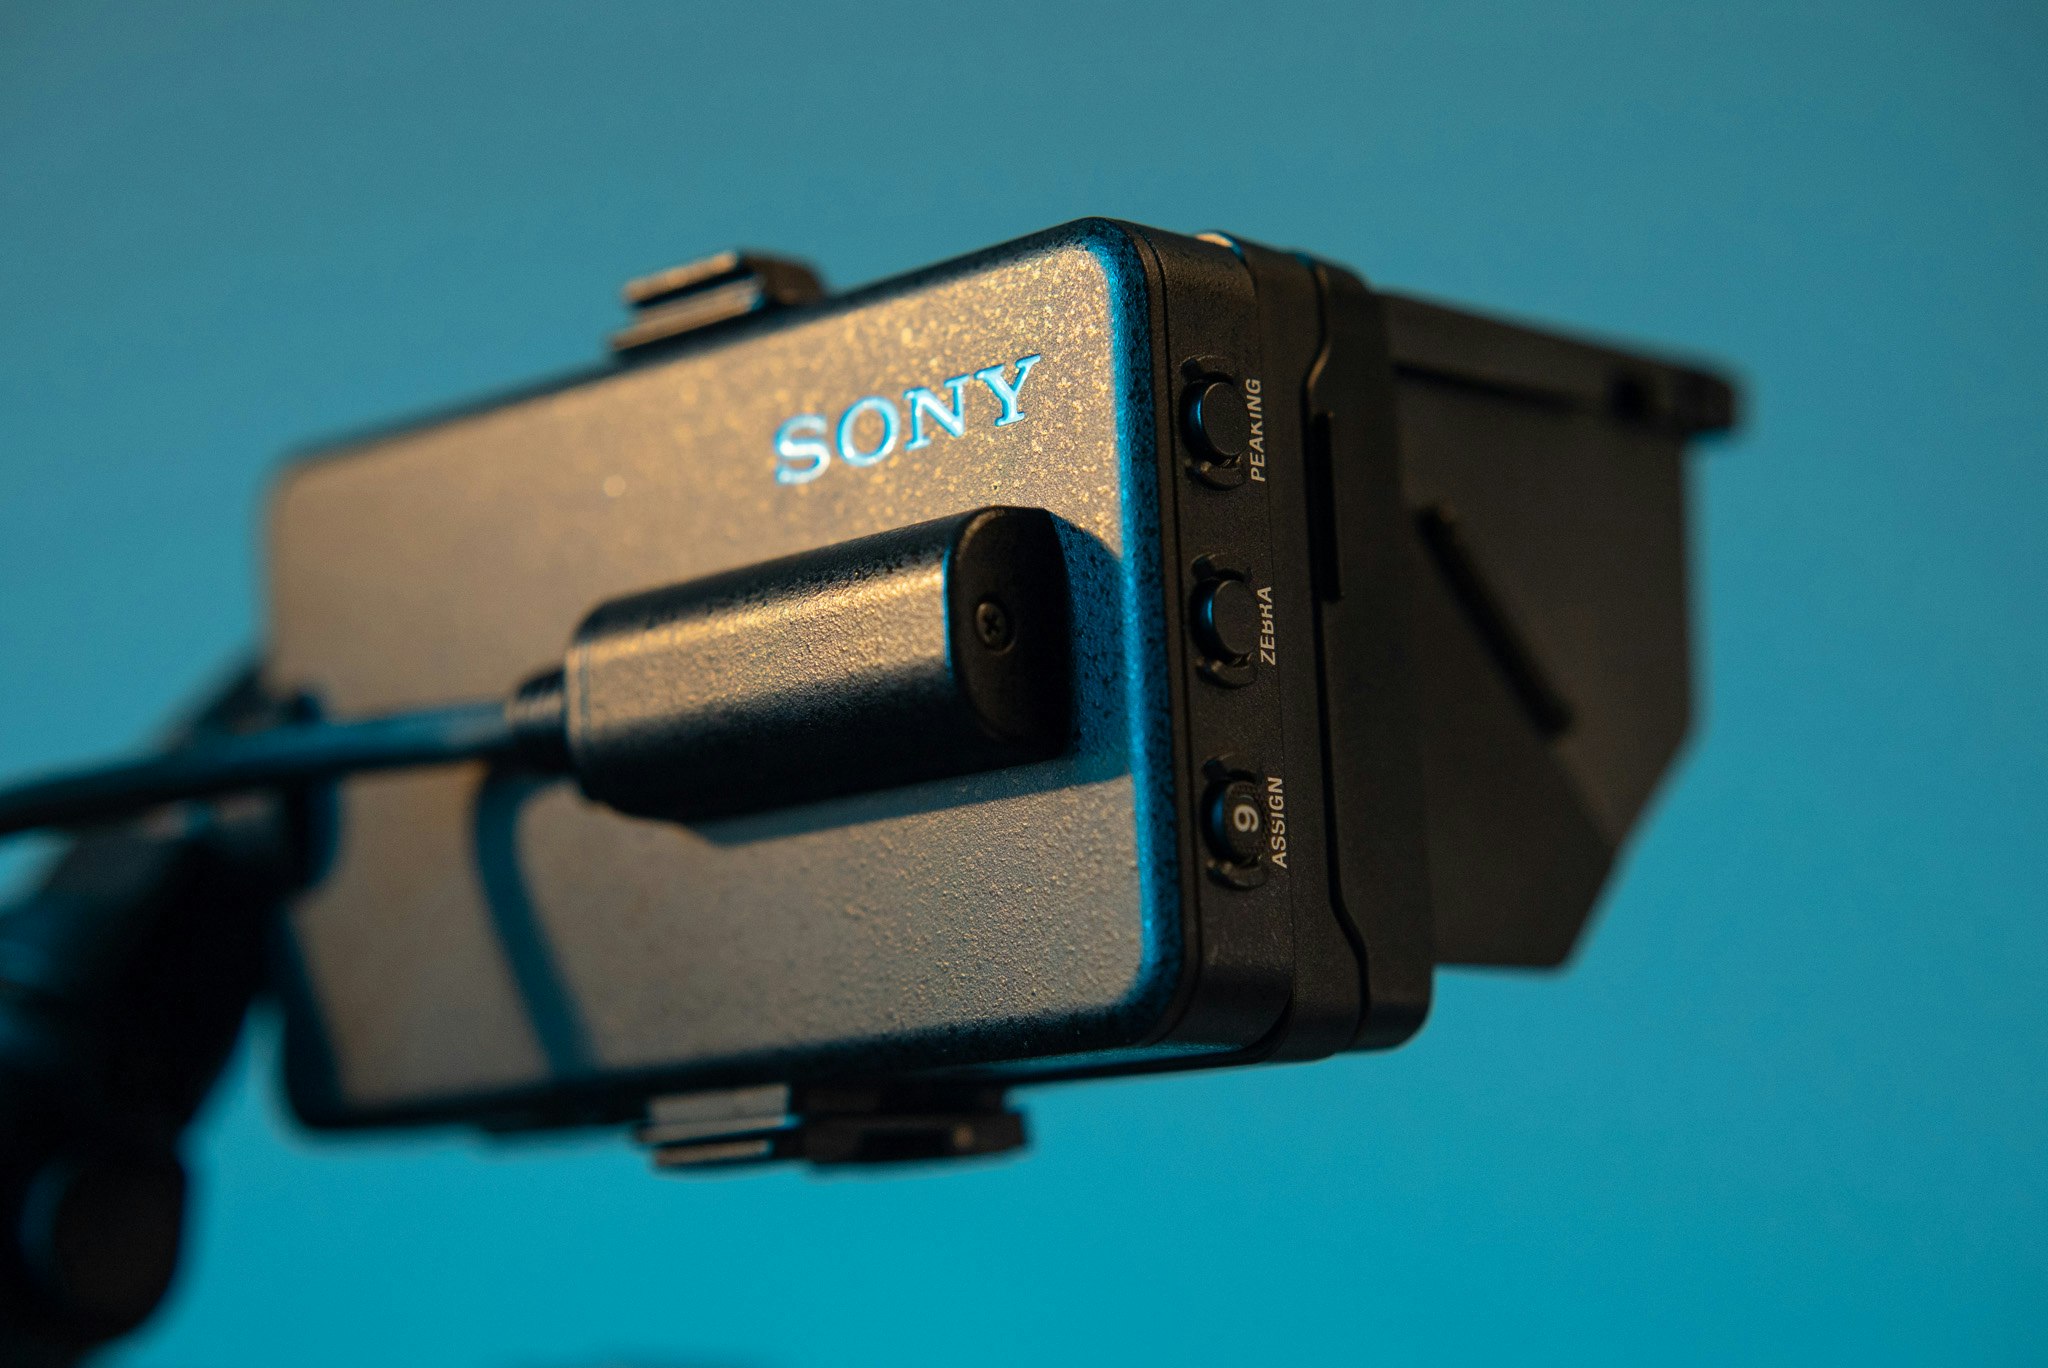 Sony Fx6 LCD viewfinder 3.5